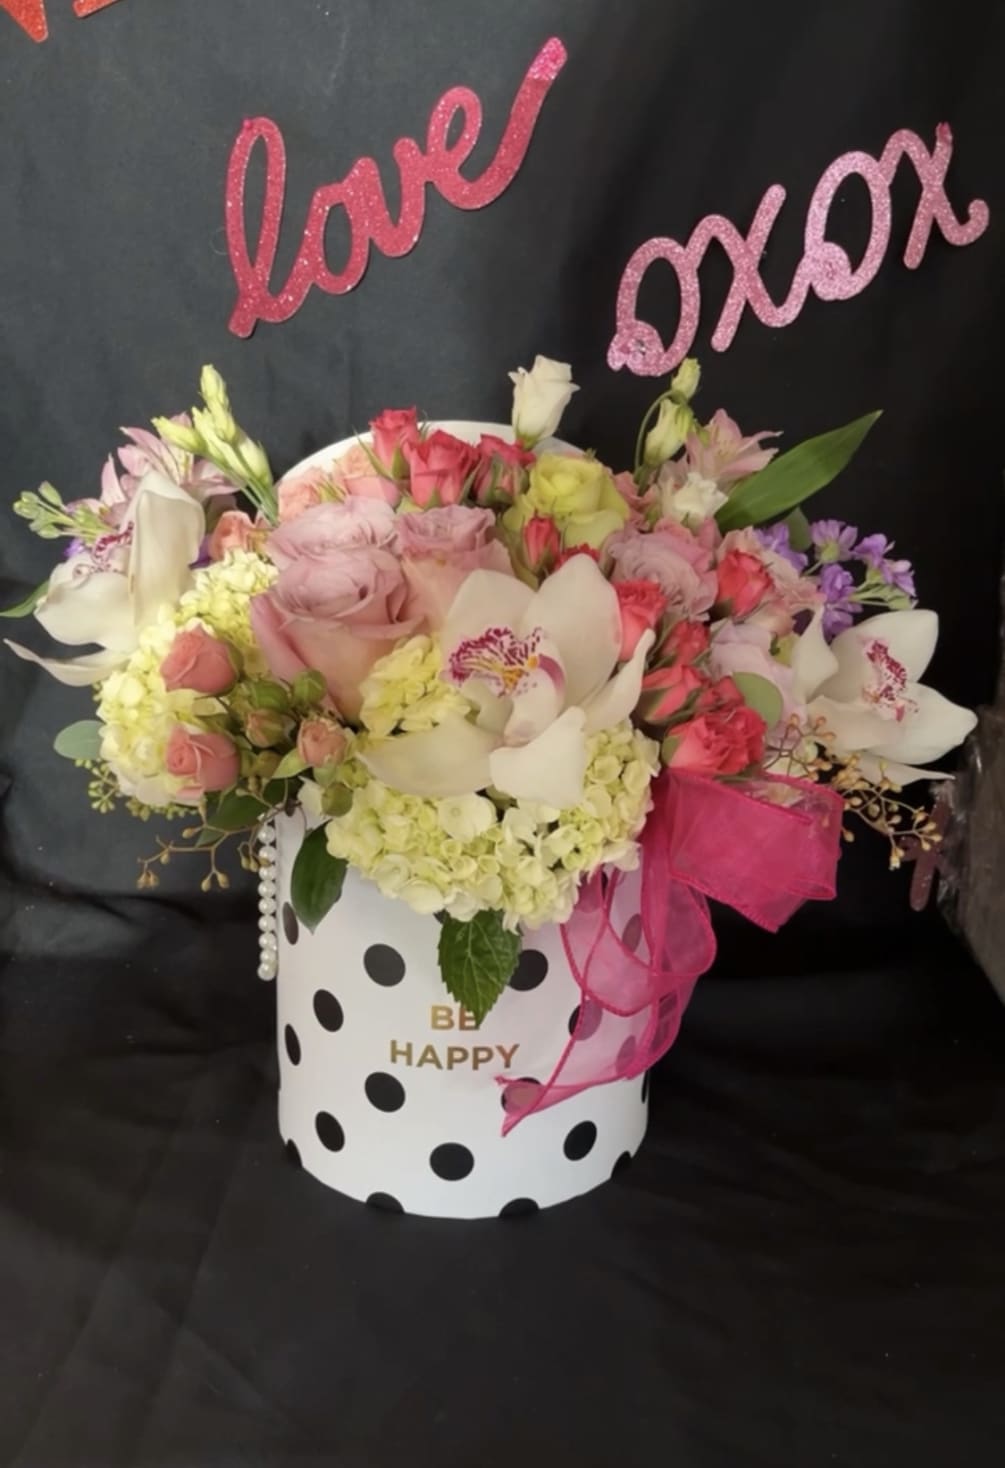 Tall cylinder box filled with a color mix of Roses, Orchids, Hydrangeas